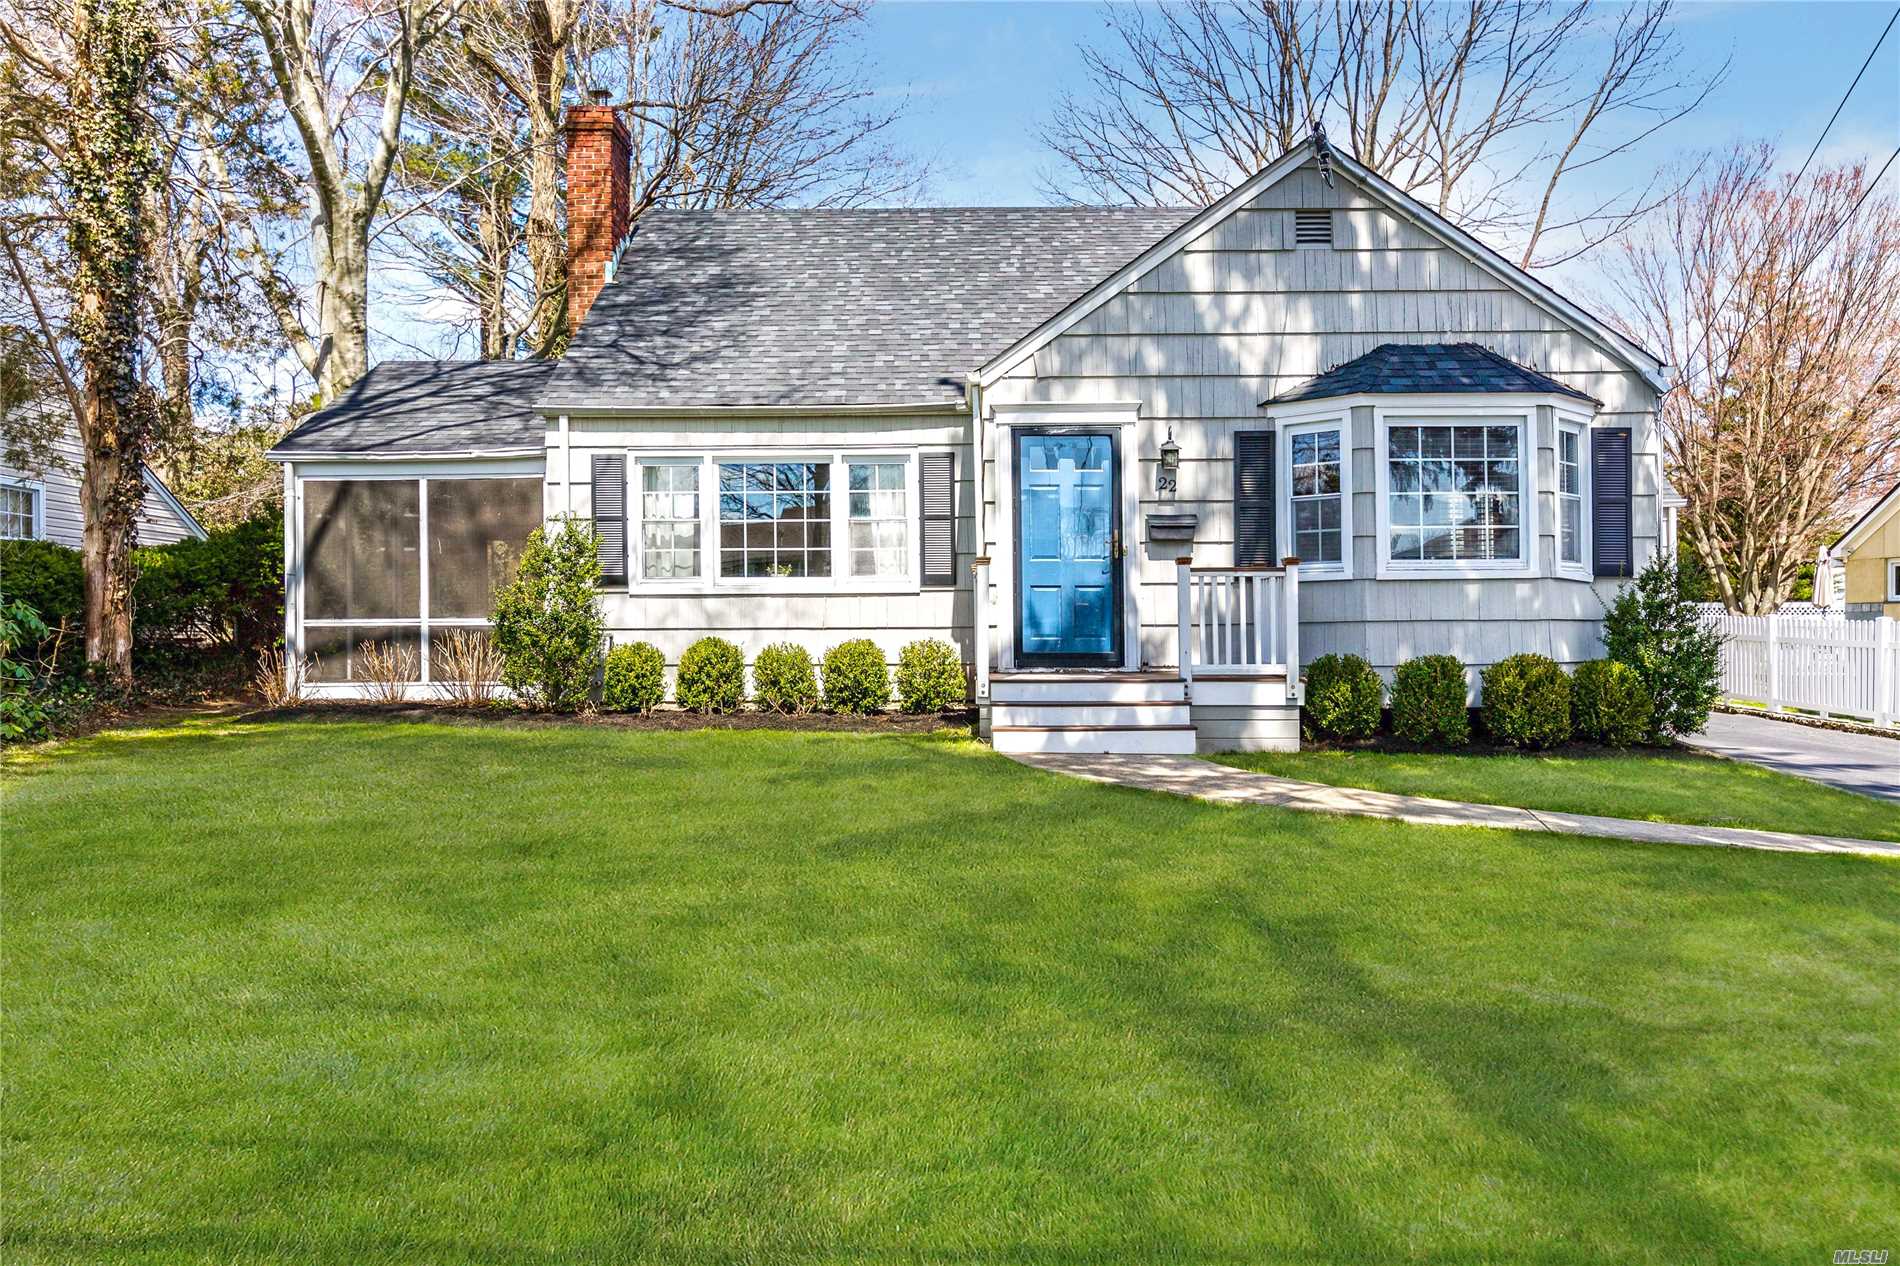 Prime Location In The Heart Of Glen Head On The North Shore Of Long Island. This Bright, Pristine, Blue Door Colonial Is Set On An Oversized 70X138 Lot And A Superb Double Wide Tree Lined Street. Beautiful Backyard. Quality Finishes And Updates Since 2011 Include Renovated Kitchen And Baths, Natural Gas Heat Conversion And Central Air. New Roof 2016. 3 Bedrooms Plus An Office/Nursery. North Shore Schools And Glenwood Landing Elementary. Close To Shops, Gourmet Markets, Train, Beaches And Parks.